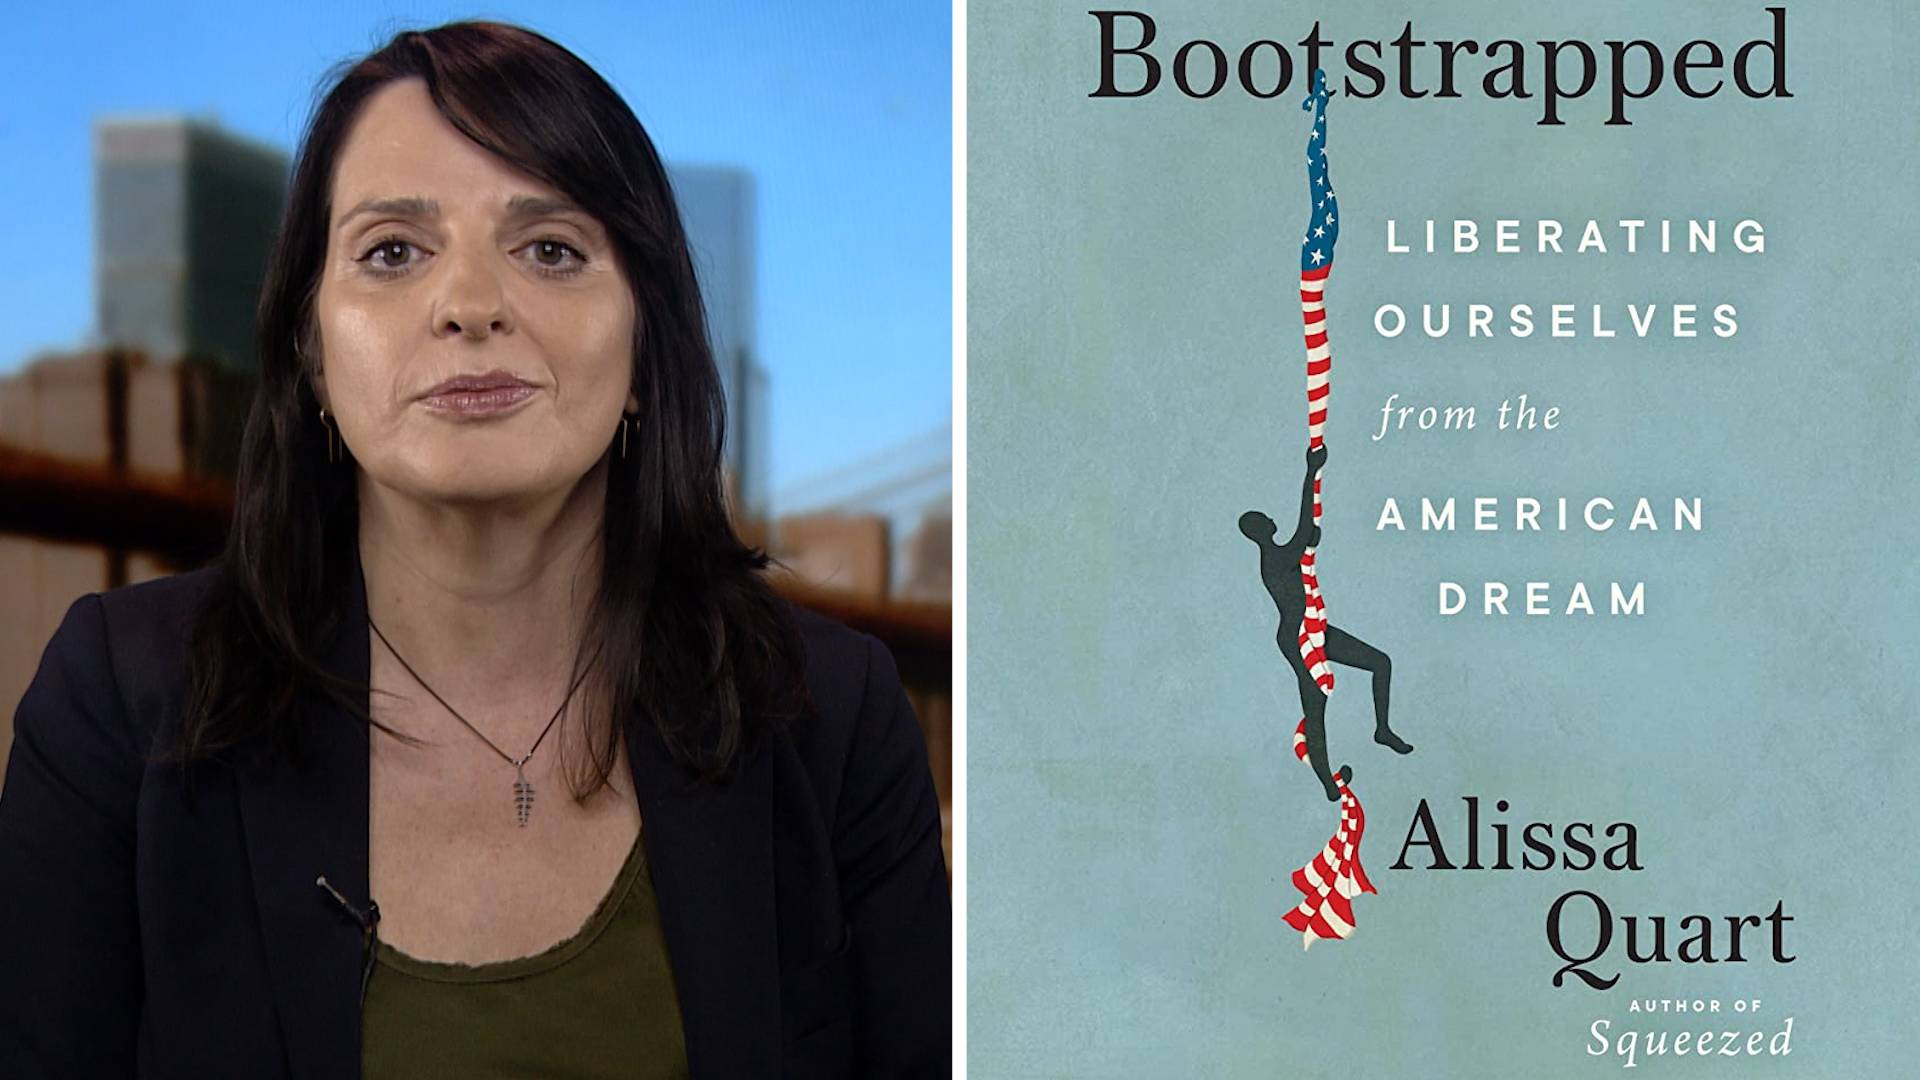 Book Review: A Progressive Manifesto -- Bootstrapped: Liberating Ourselves  from the American Dream - The Arts Fuse